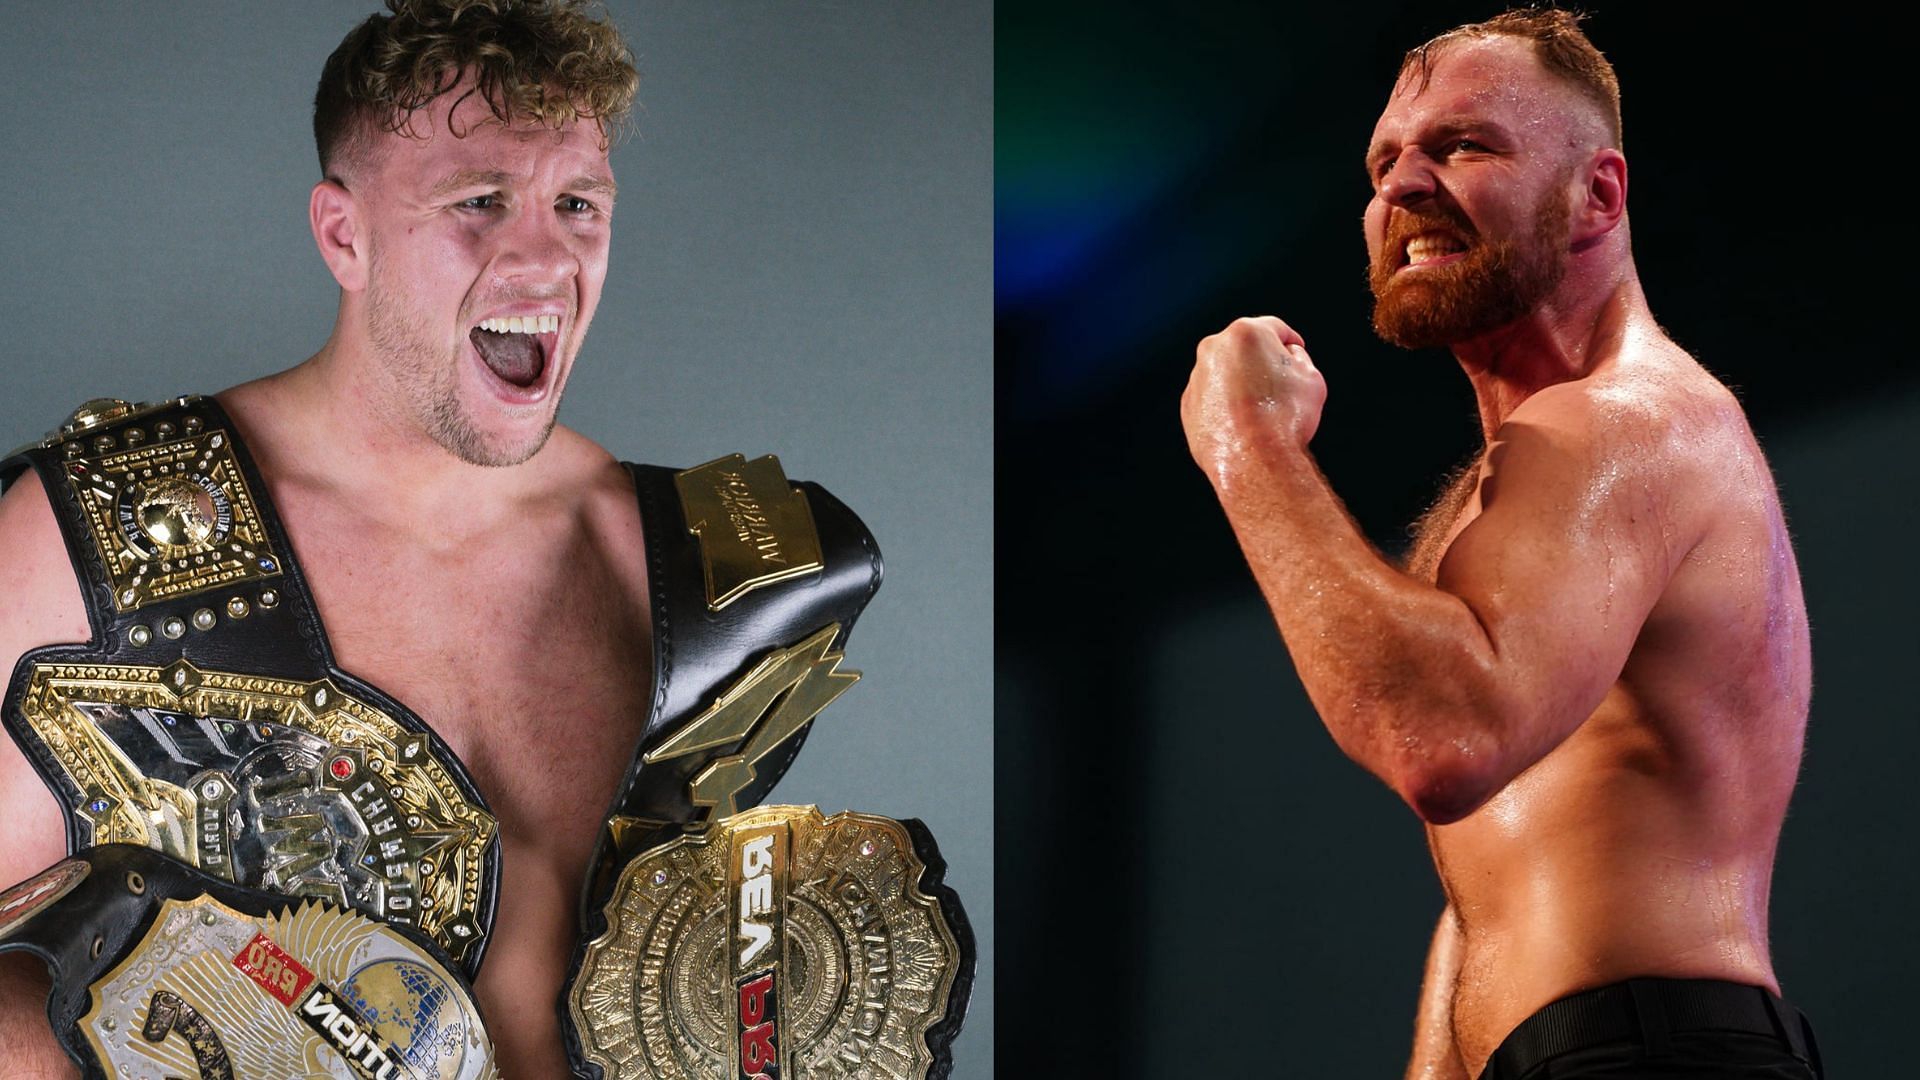 Who do you want Will Ospreay to face in AEW?